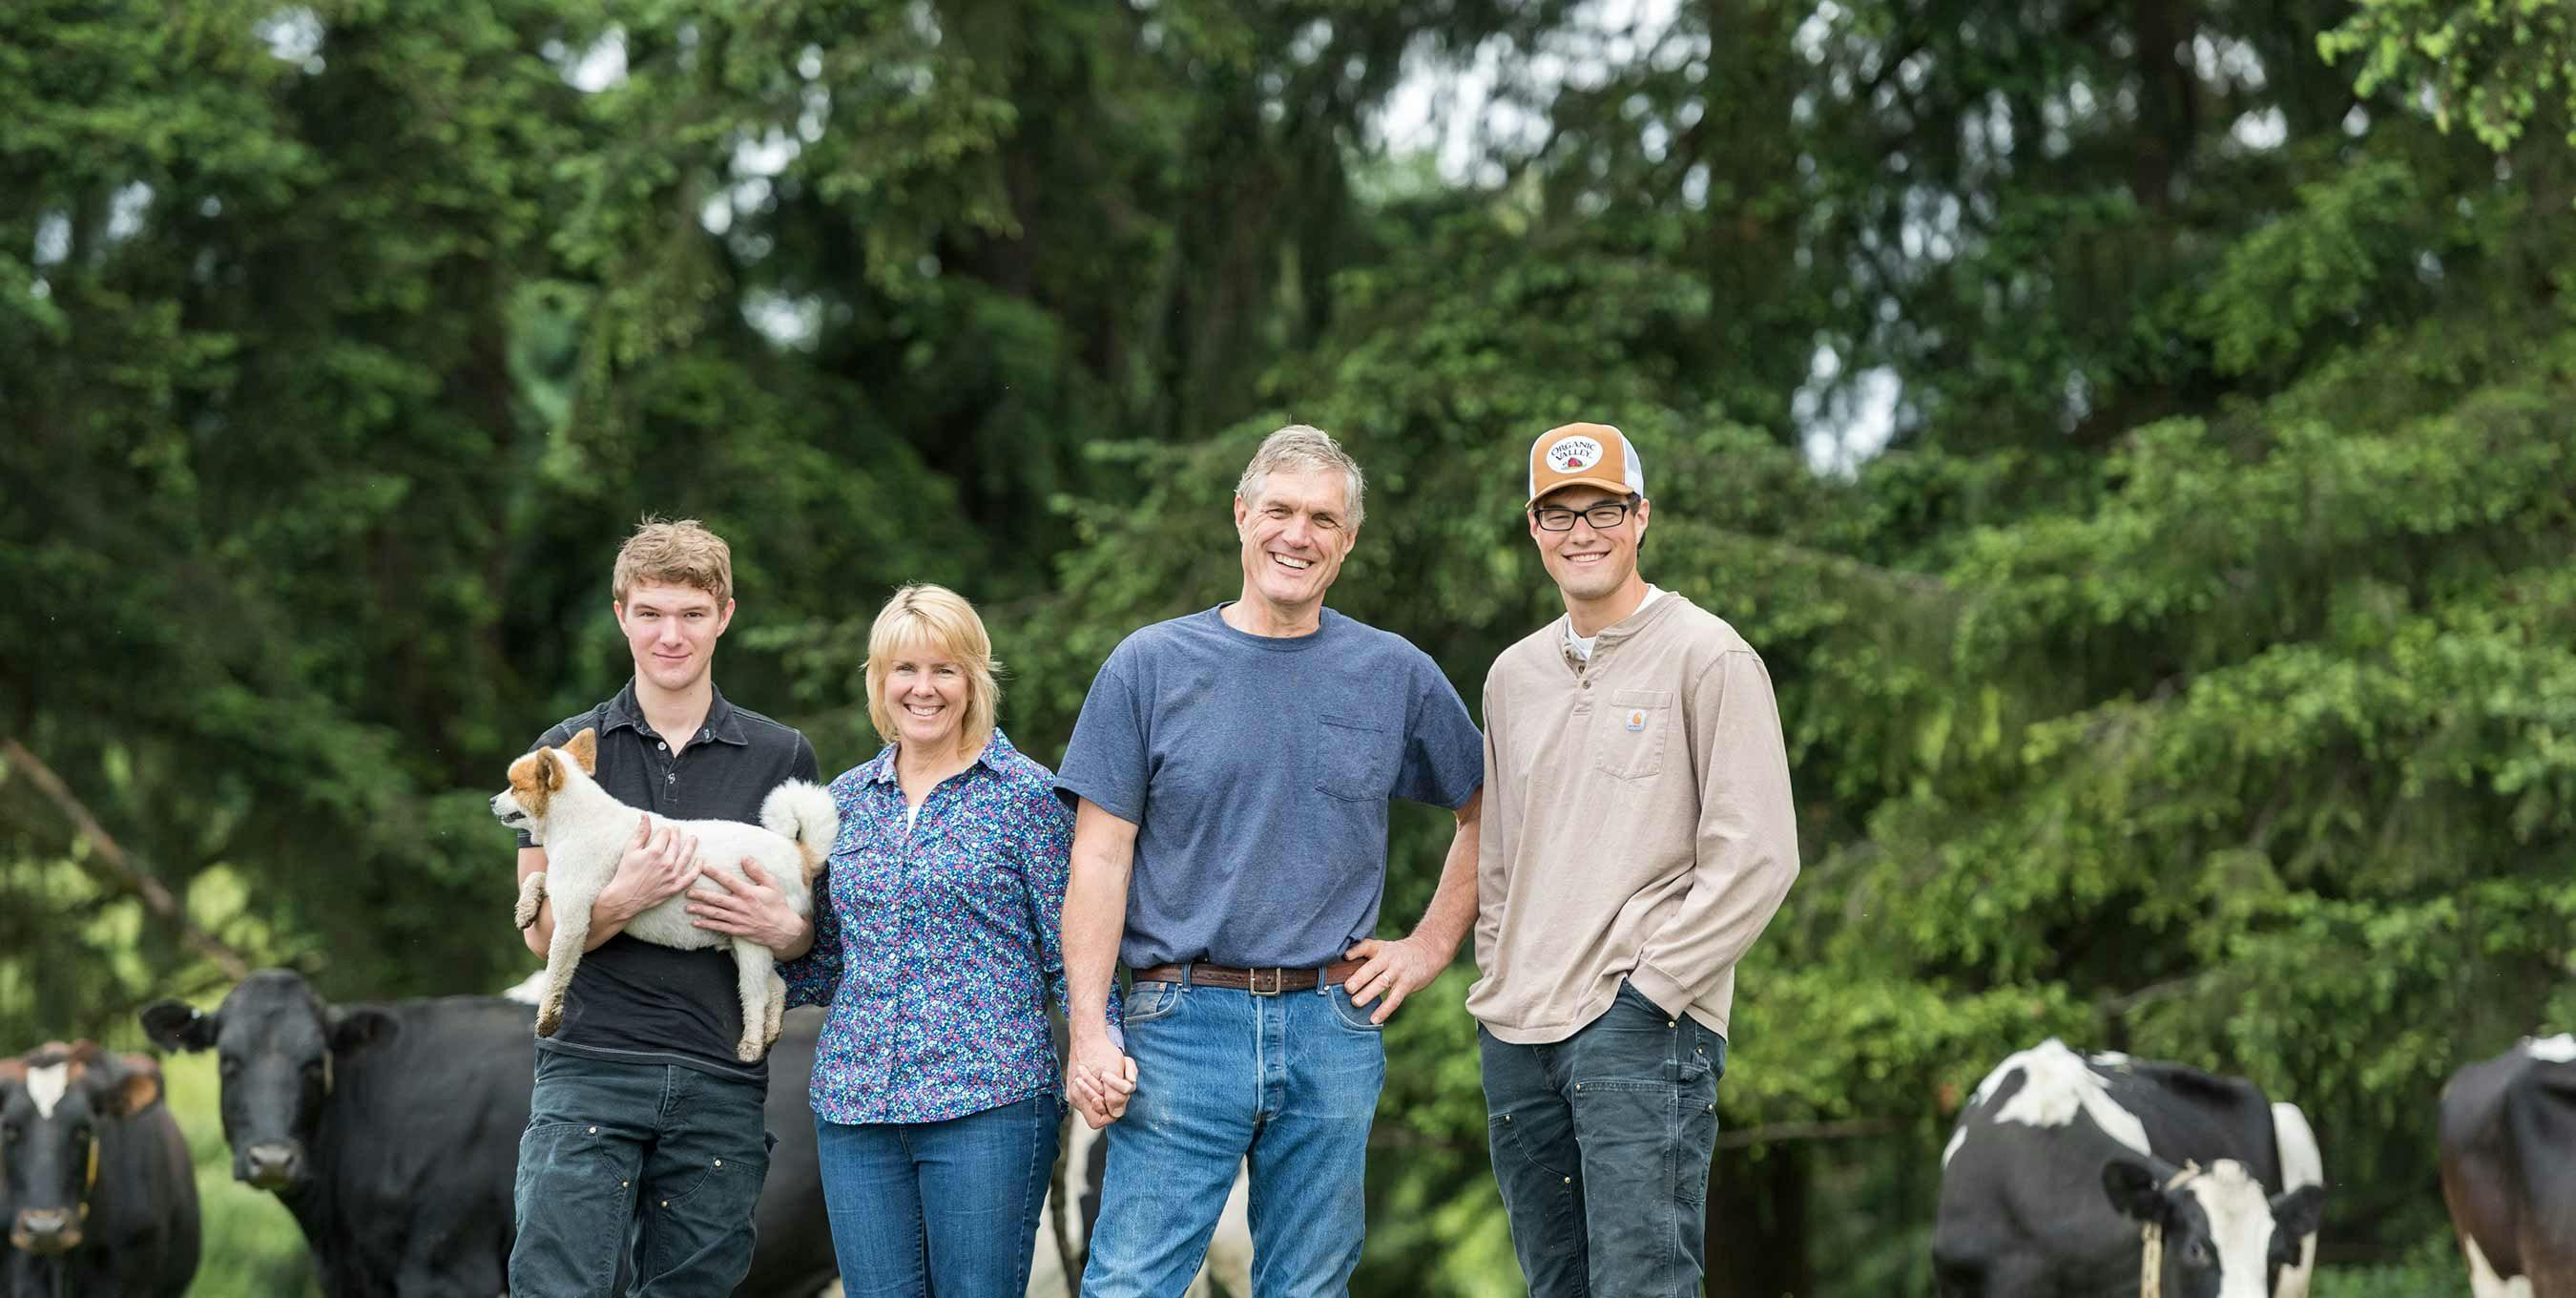 The van Tol family standing together on their farm in La Center, WA.